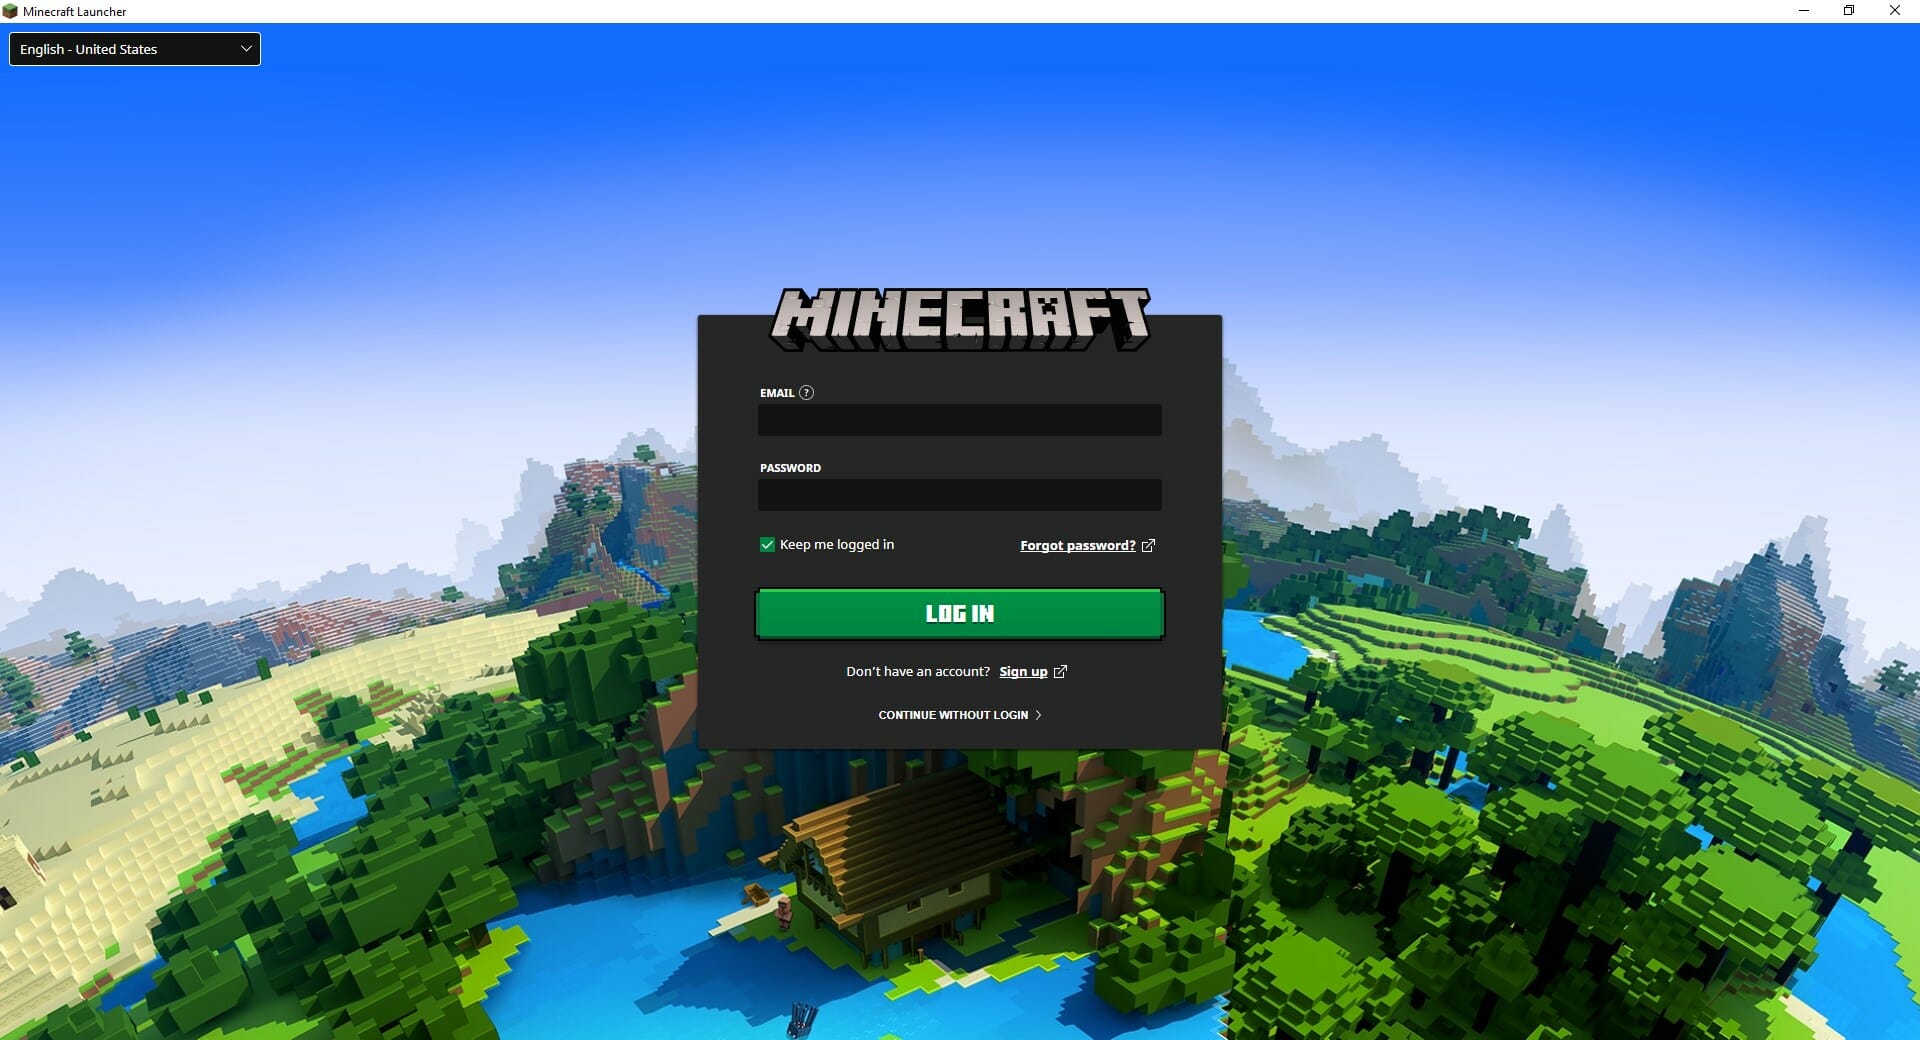 You'll need a Microsoft account to play Minecraft: Java Edition